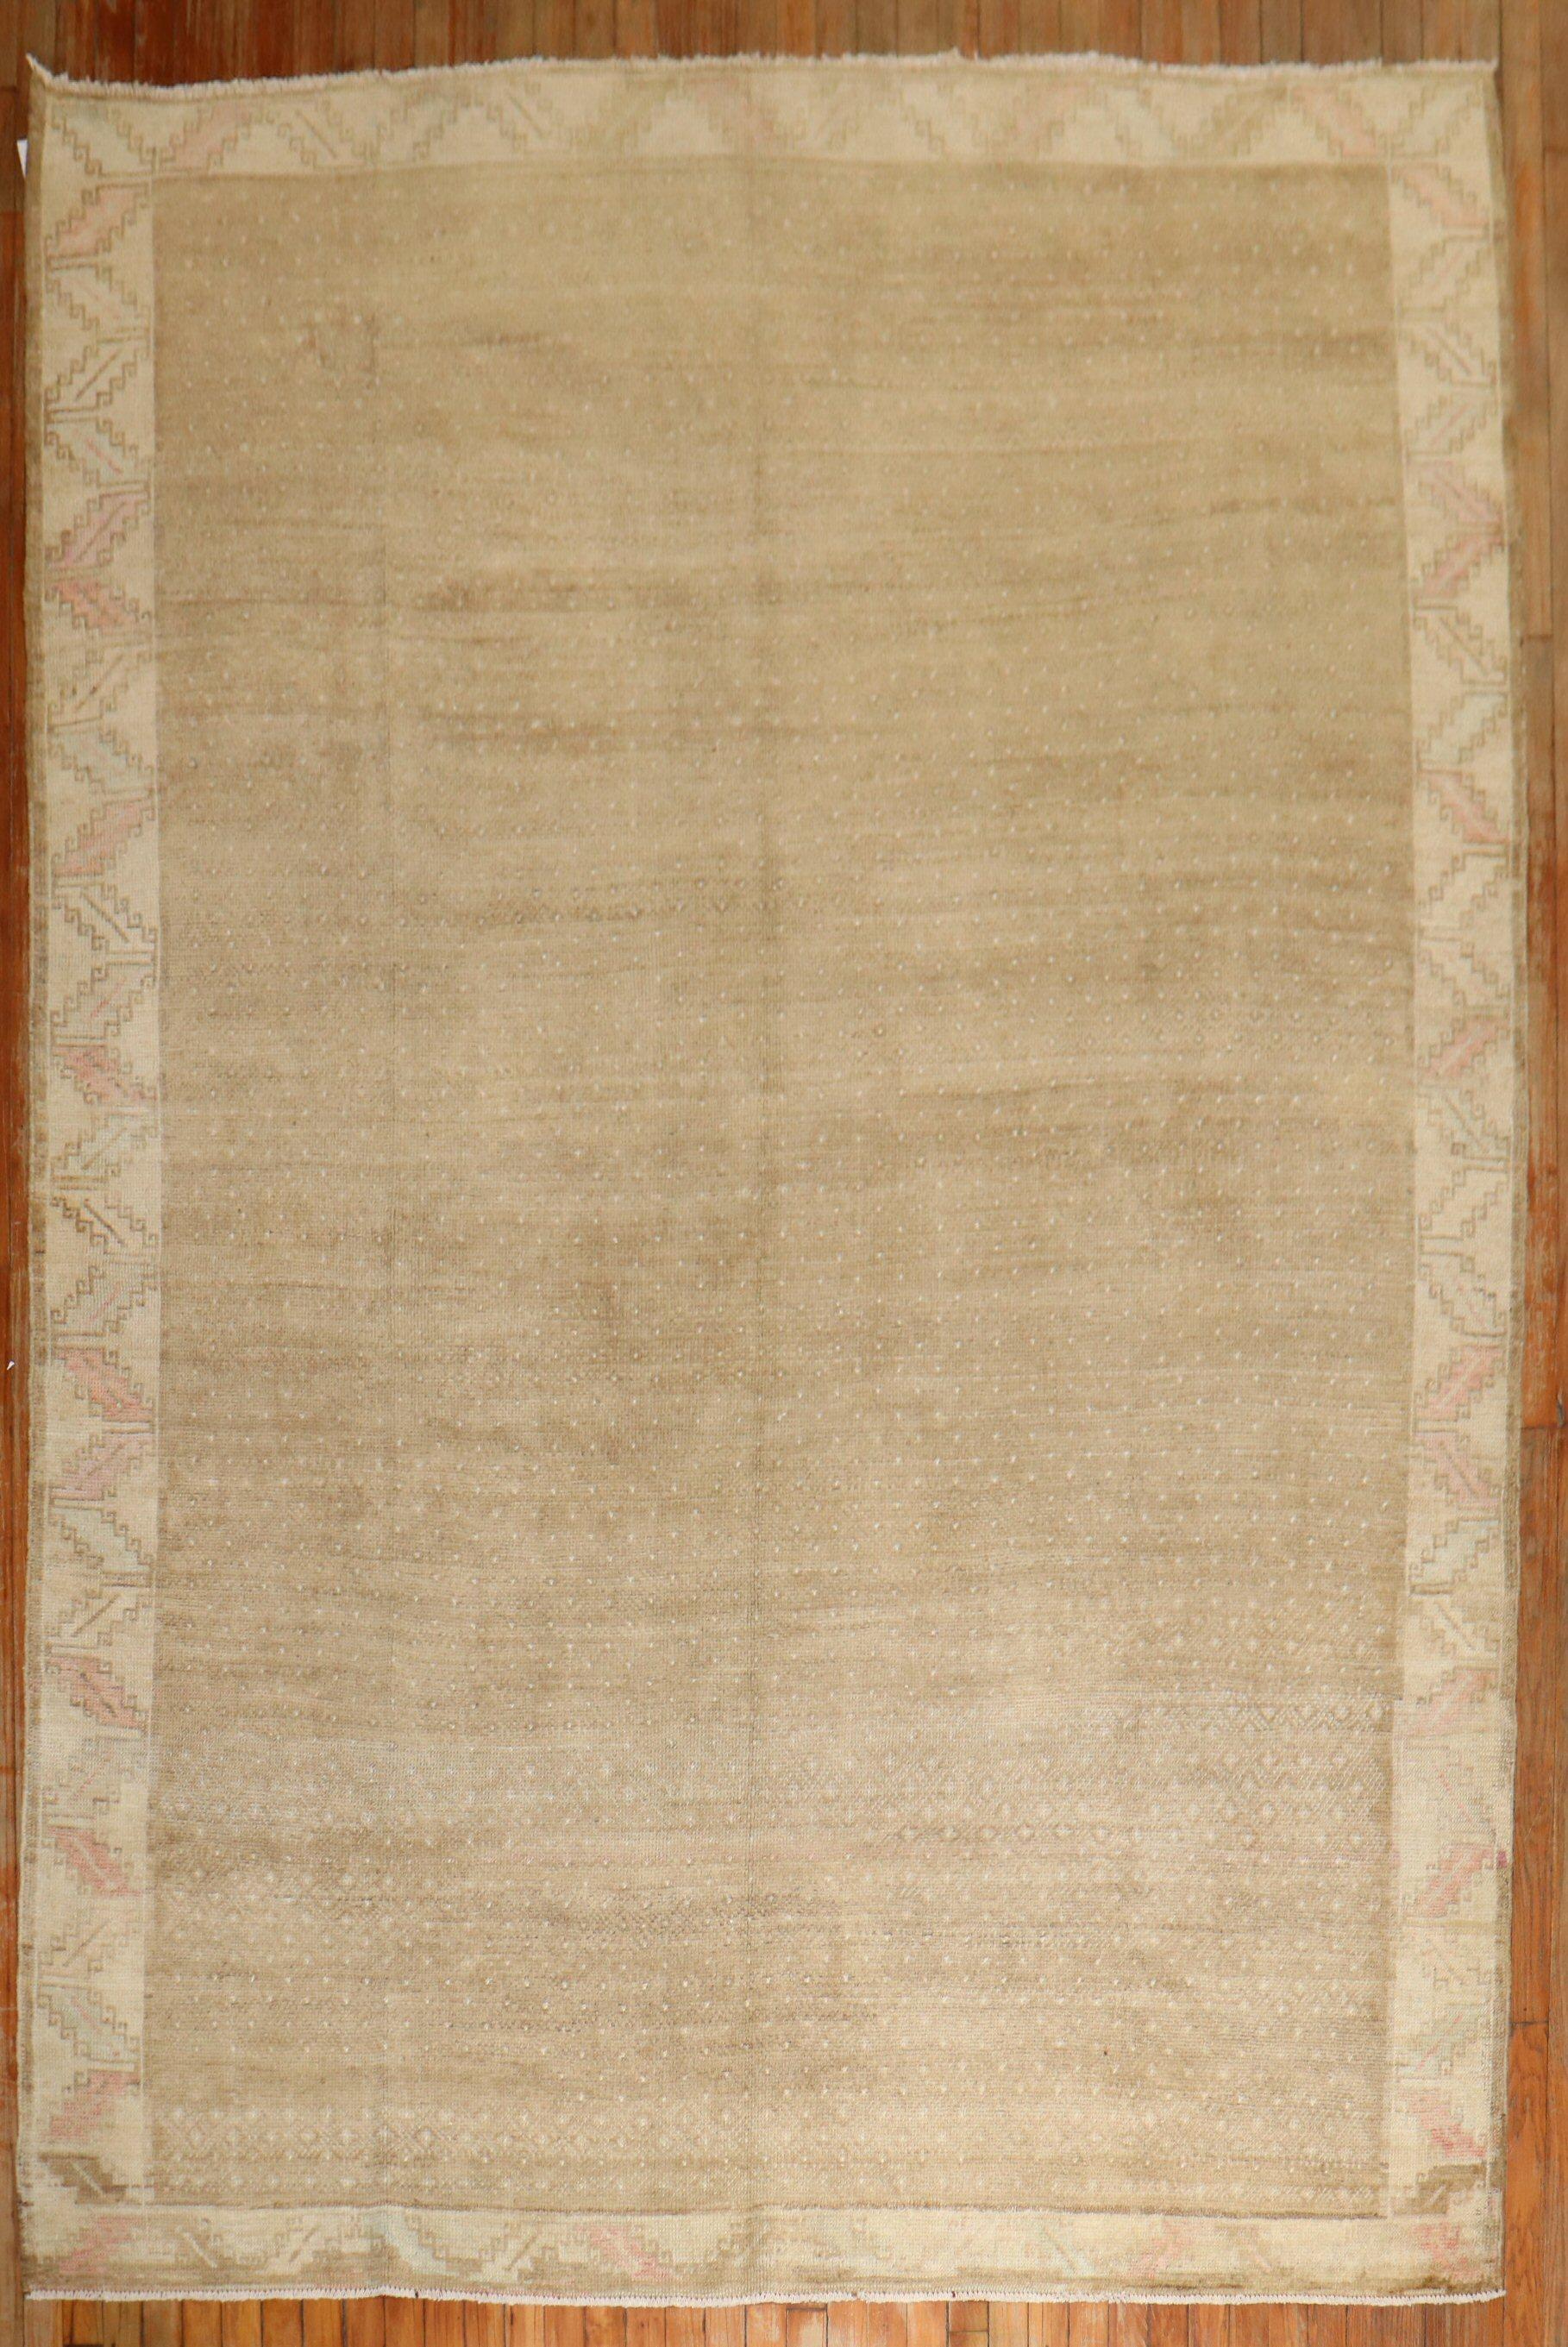 A small room-size predominantly brown Turkish rug.

Measures: 7' x 9'7